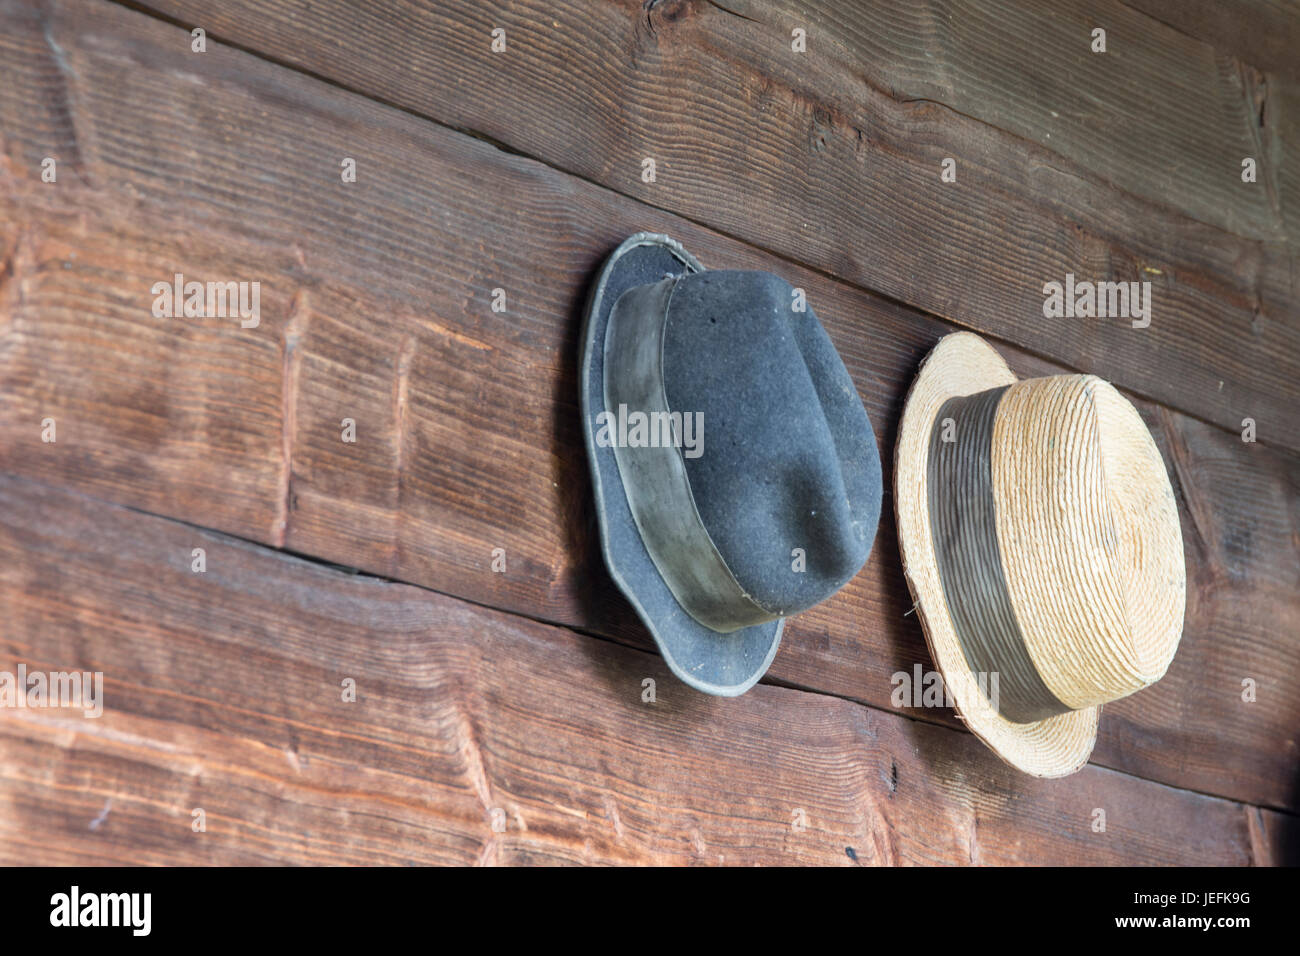 two hats hanging in a wooden wall Stock Photo